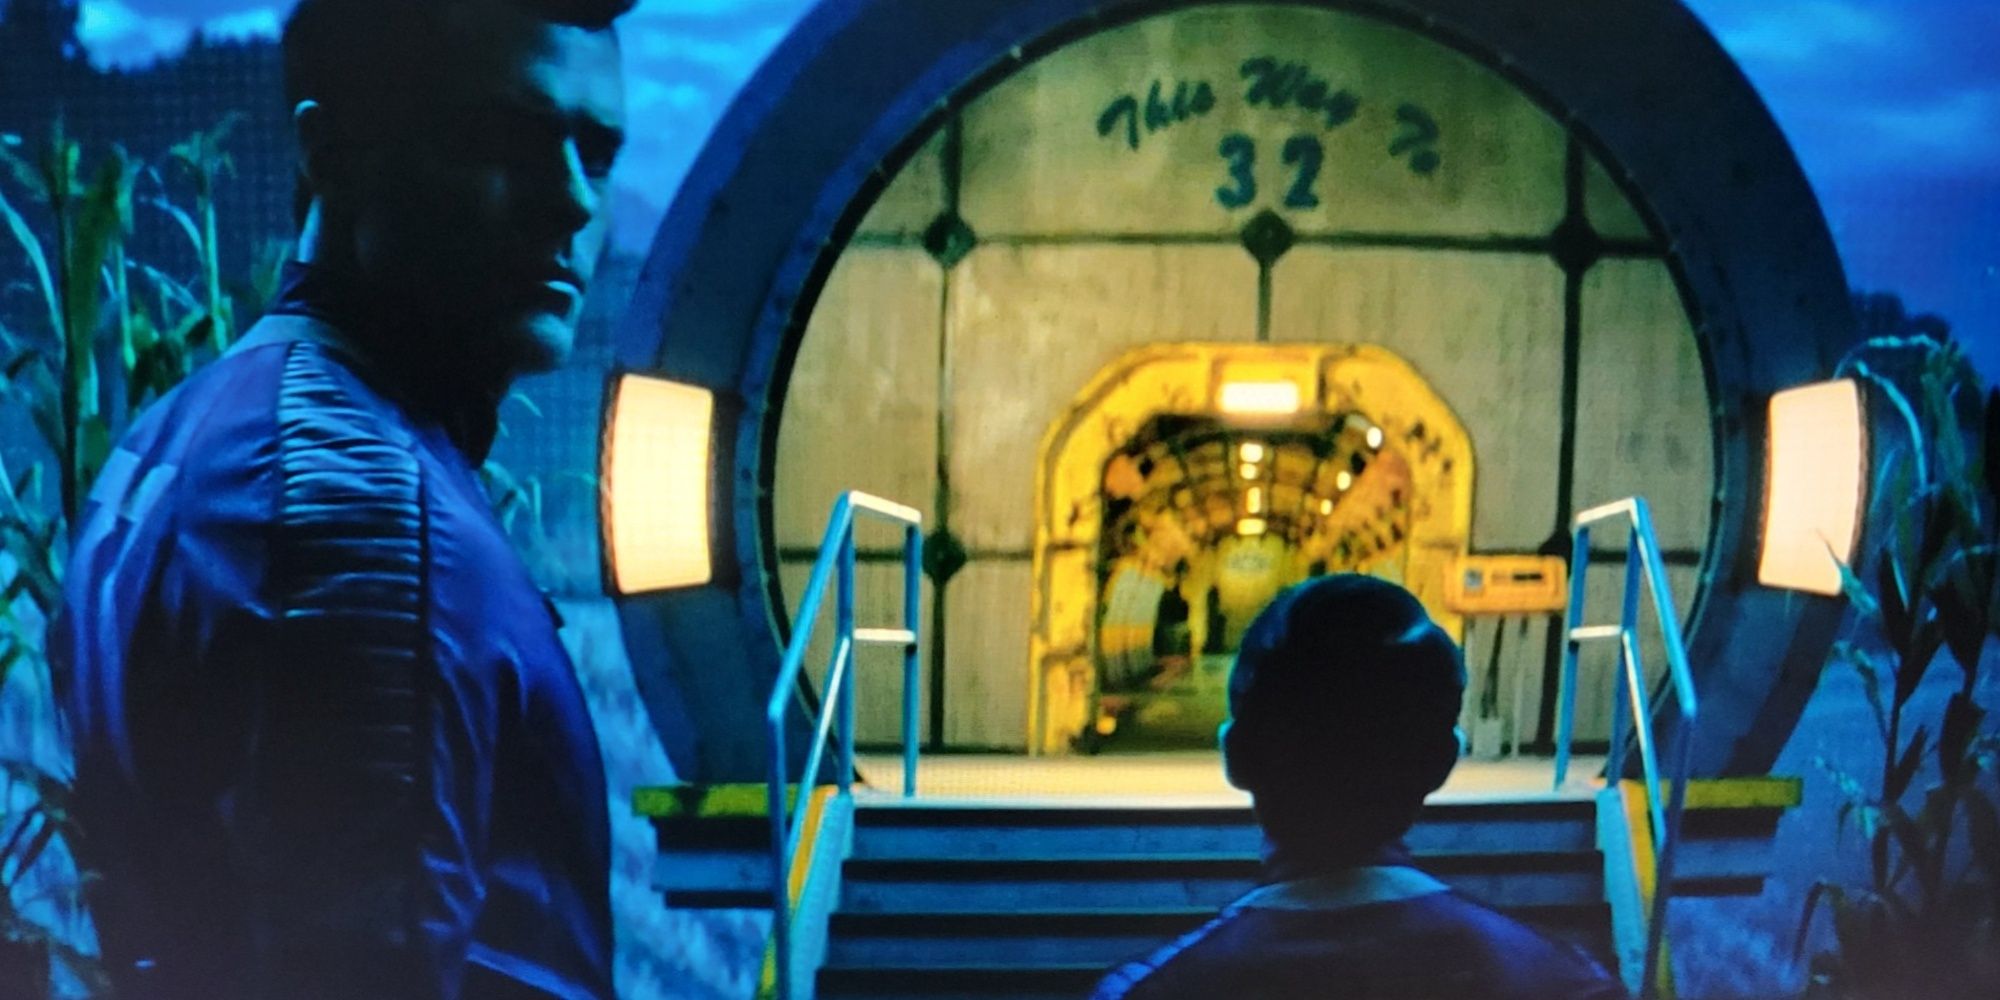 Chet facing the camera walking with his cousin Norm into the Vault 32 entryway.